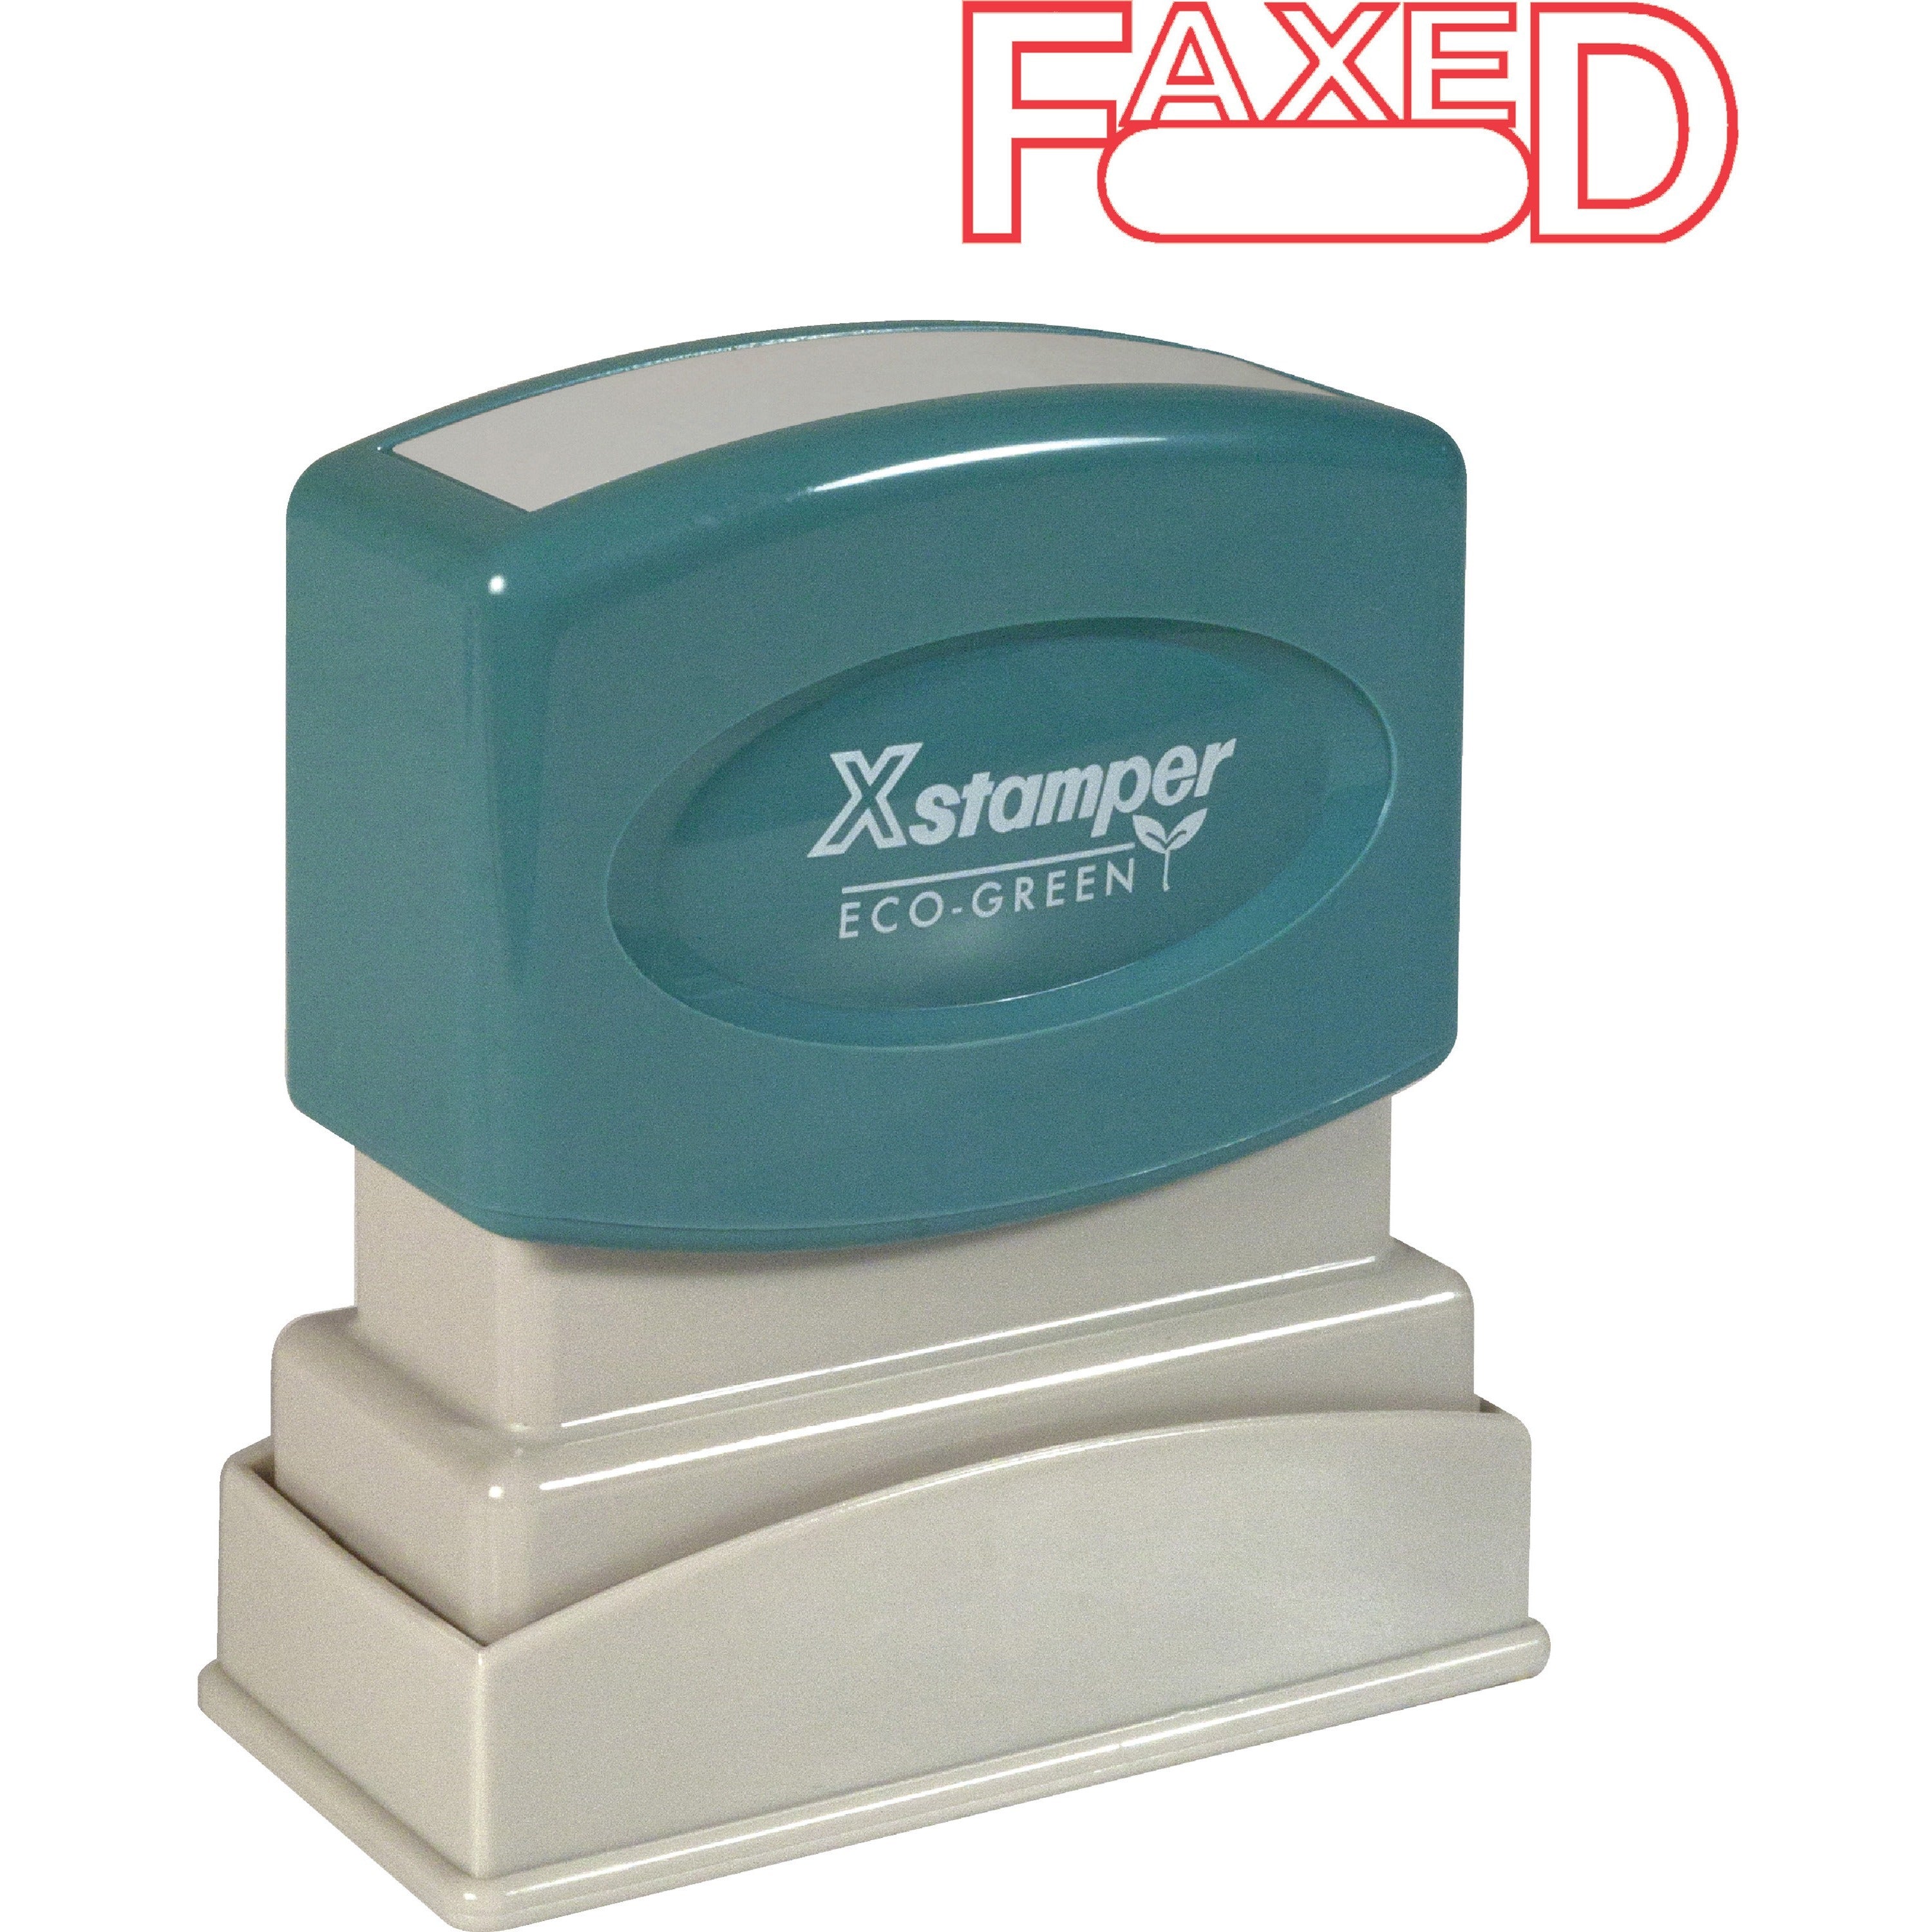 Xstamper FAXED Title Stamps - Message Stamp - "FAXED" - 0.50" Impression Width x 1.62" Impression Length - 100000 Impression(s) - Red - Recycled - 1 Each - 